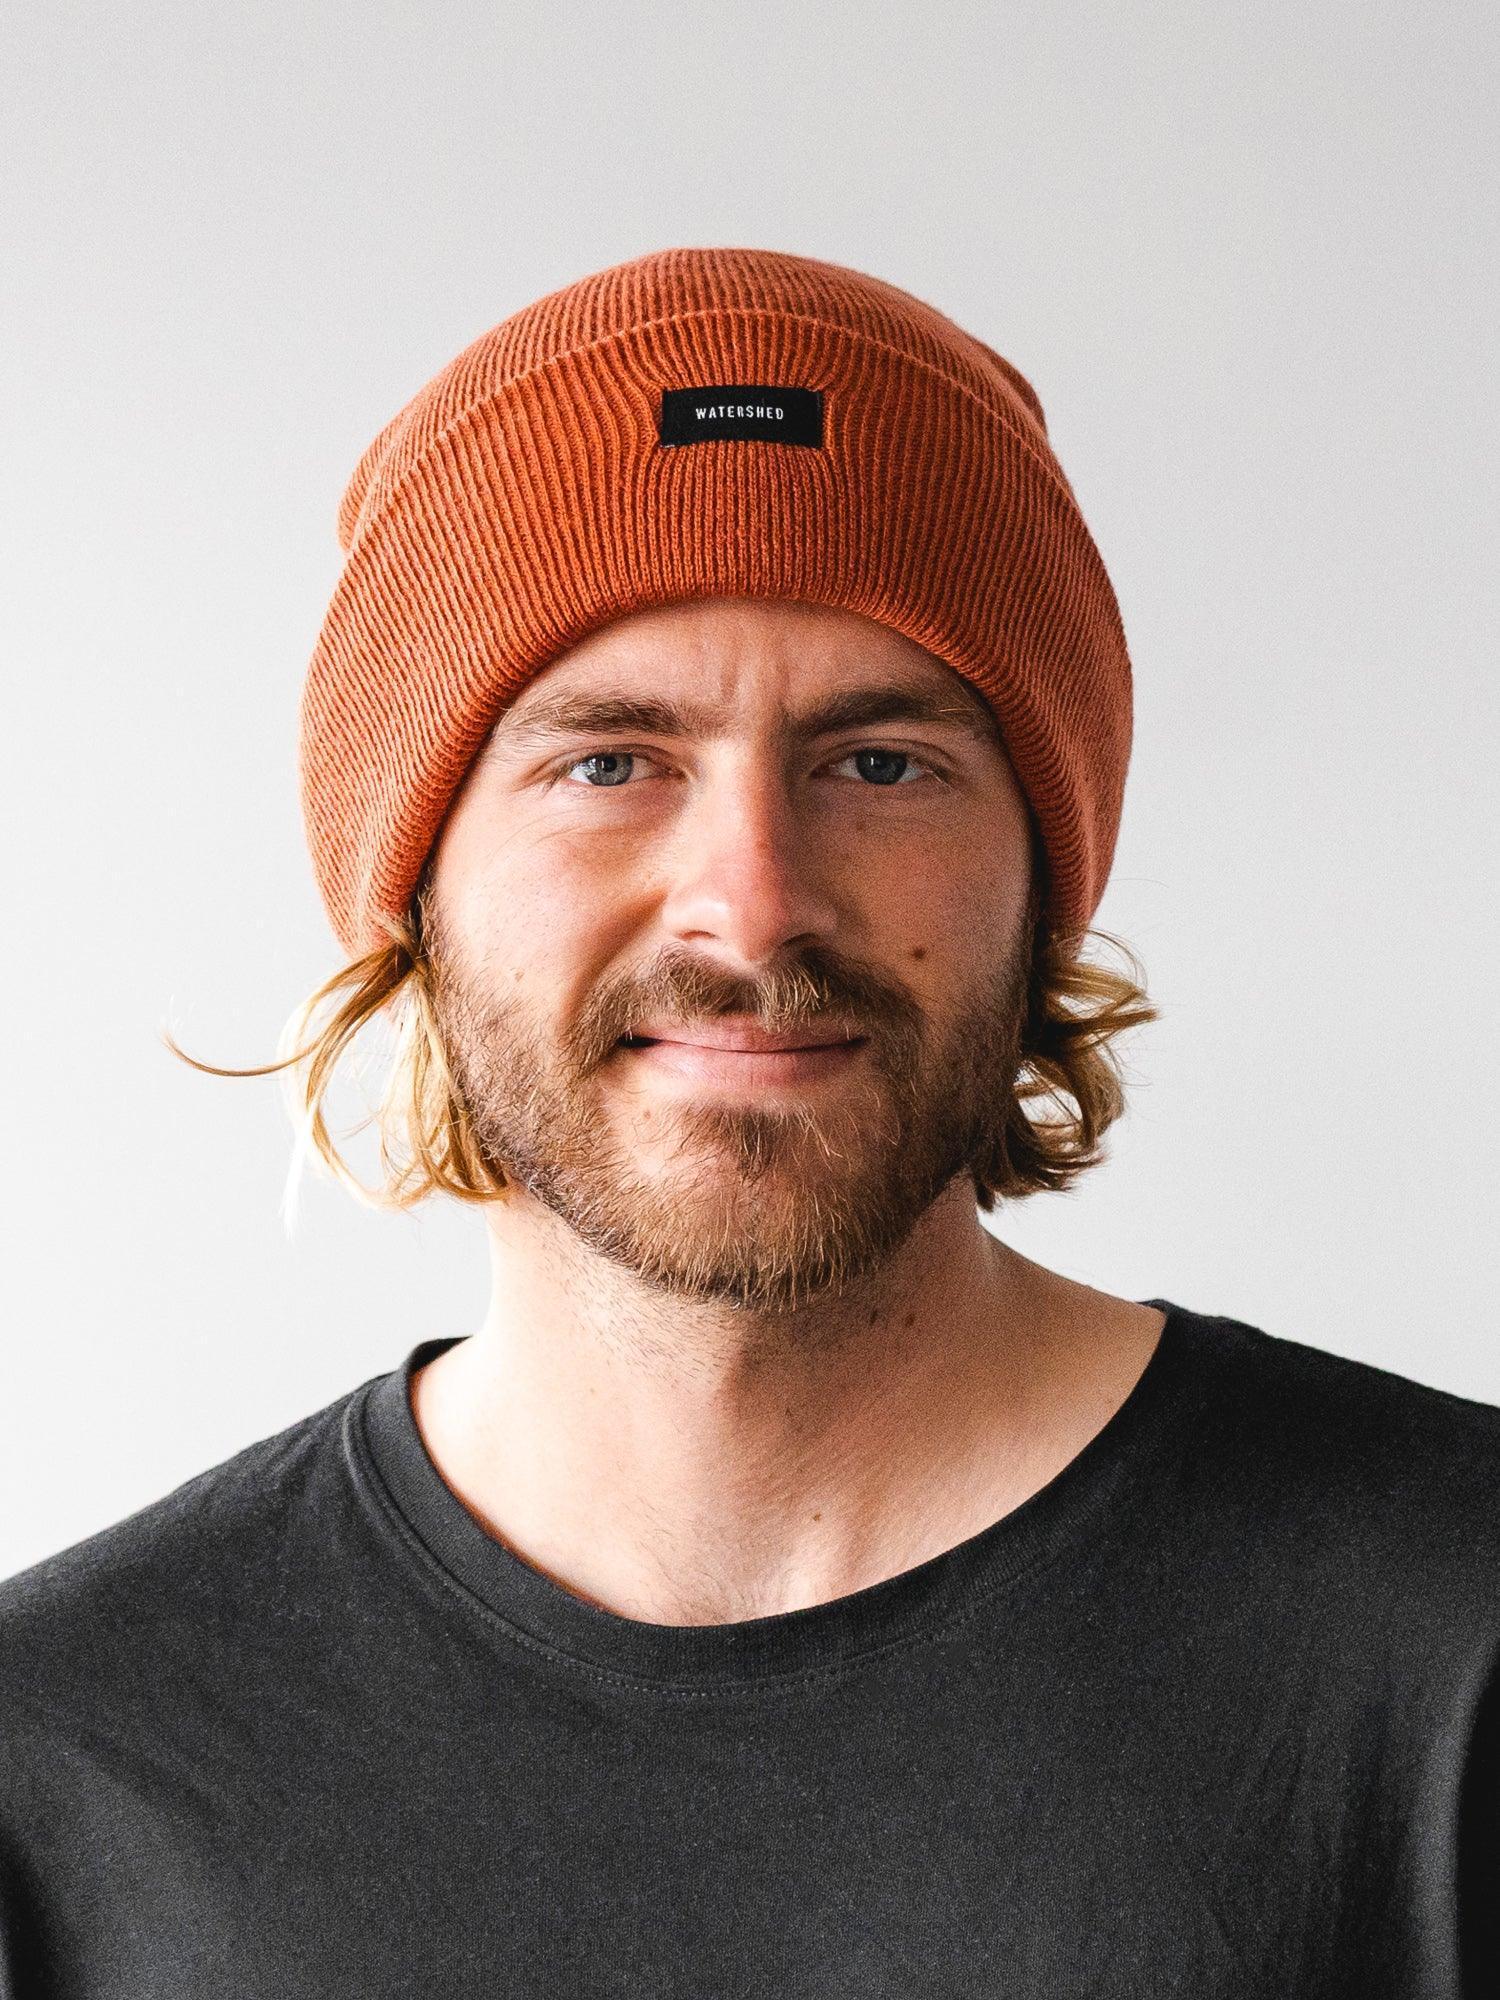 Stay warm and stylish this winter with our captivating Rust Beanie, designed for unmatched coziness and on-trend flair.